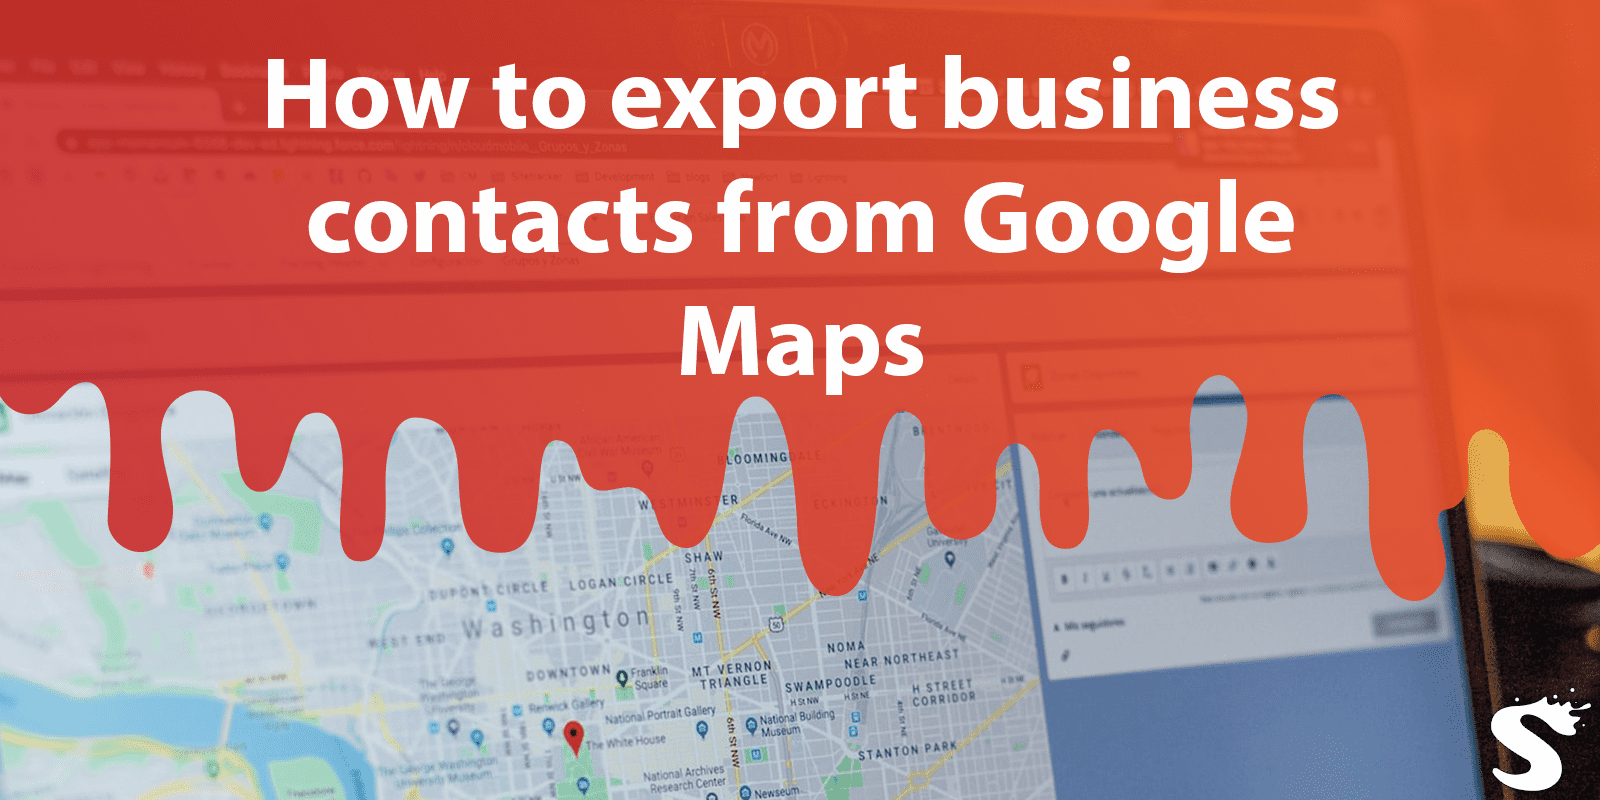 How to export business contacts from Google Maps